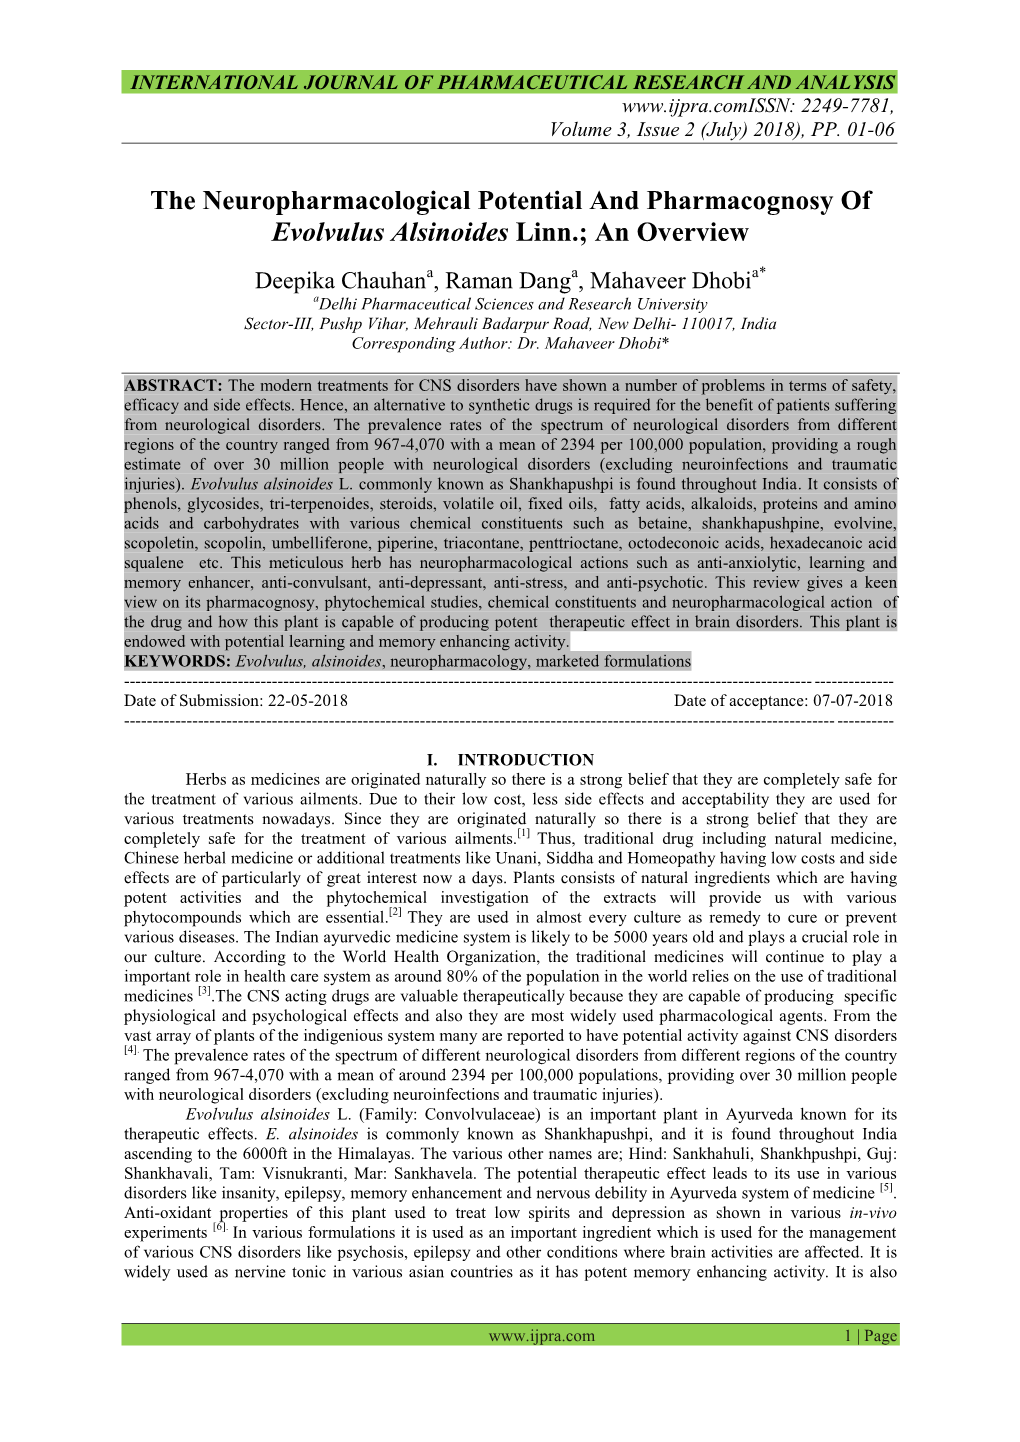 The Neuropharmacological Potential and Pharmacognosy of Evolvulus Alsinoides Linn.; an Overview